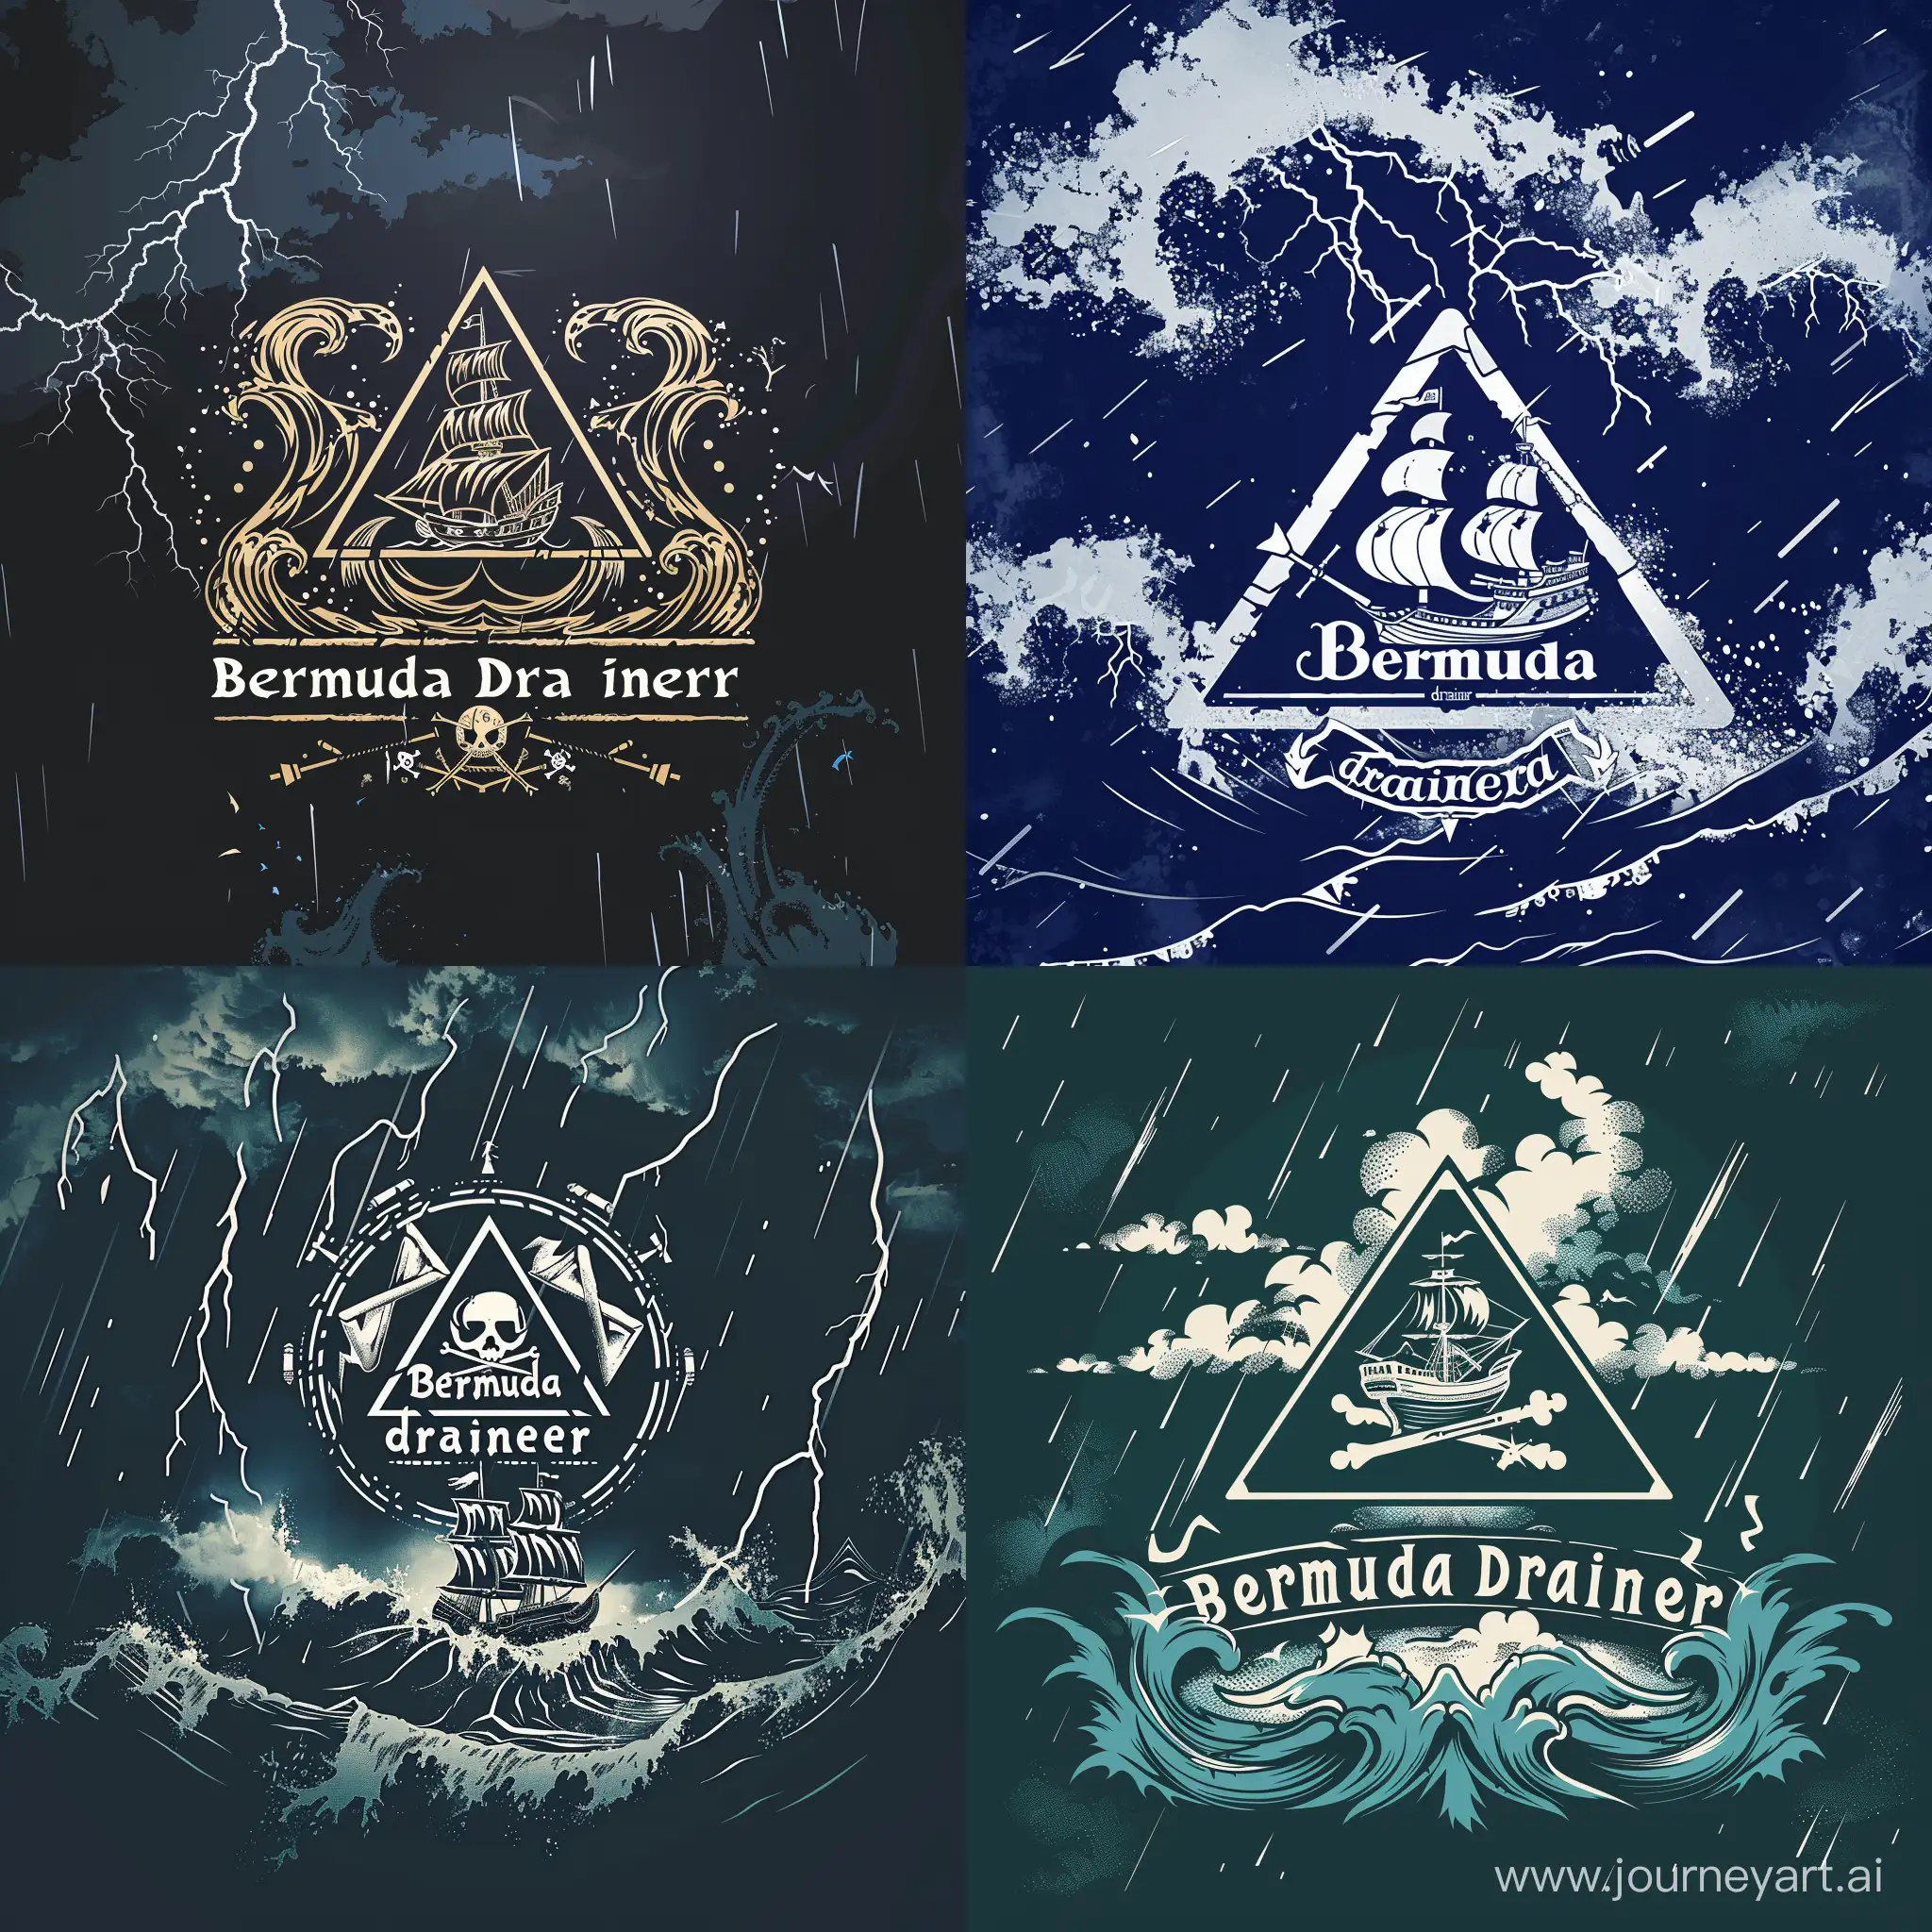 logo named “Bermuda drainer” with a triangle , pirate ship in a thunderstorm  sailing through waves